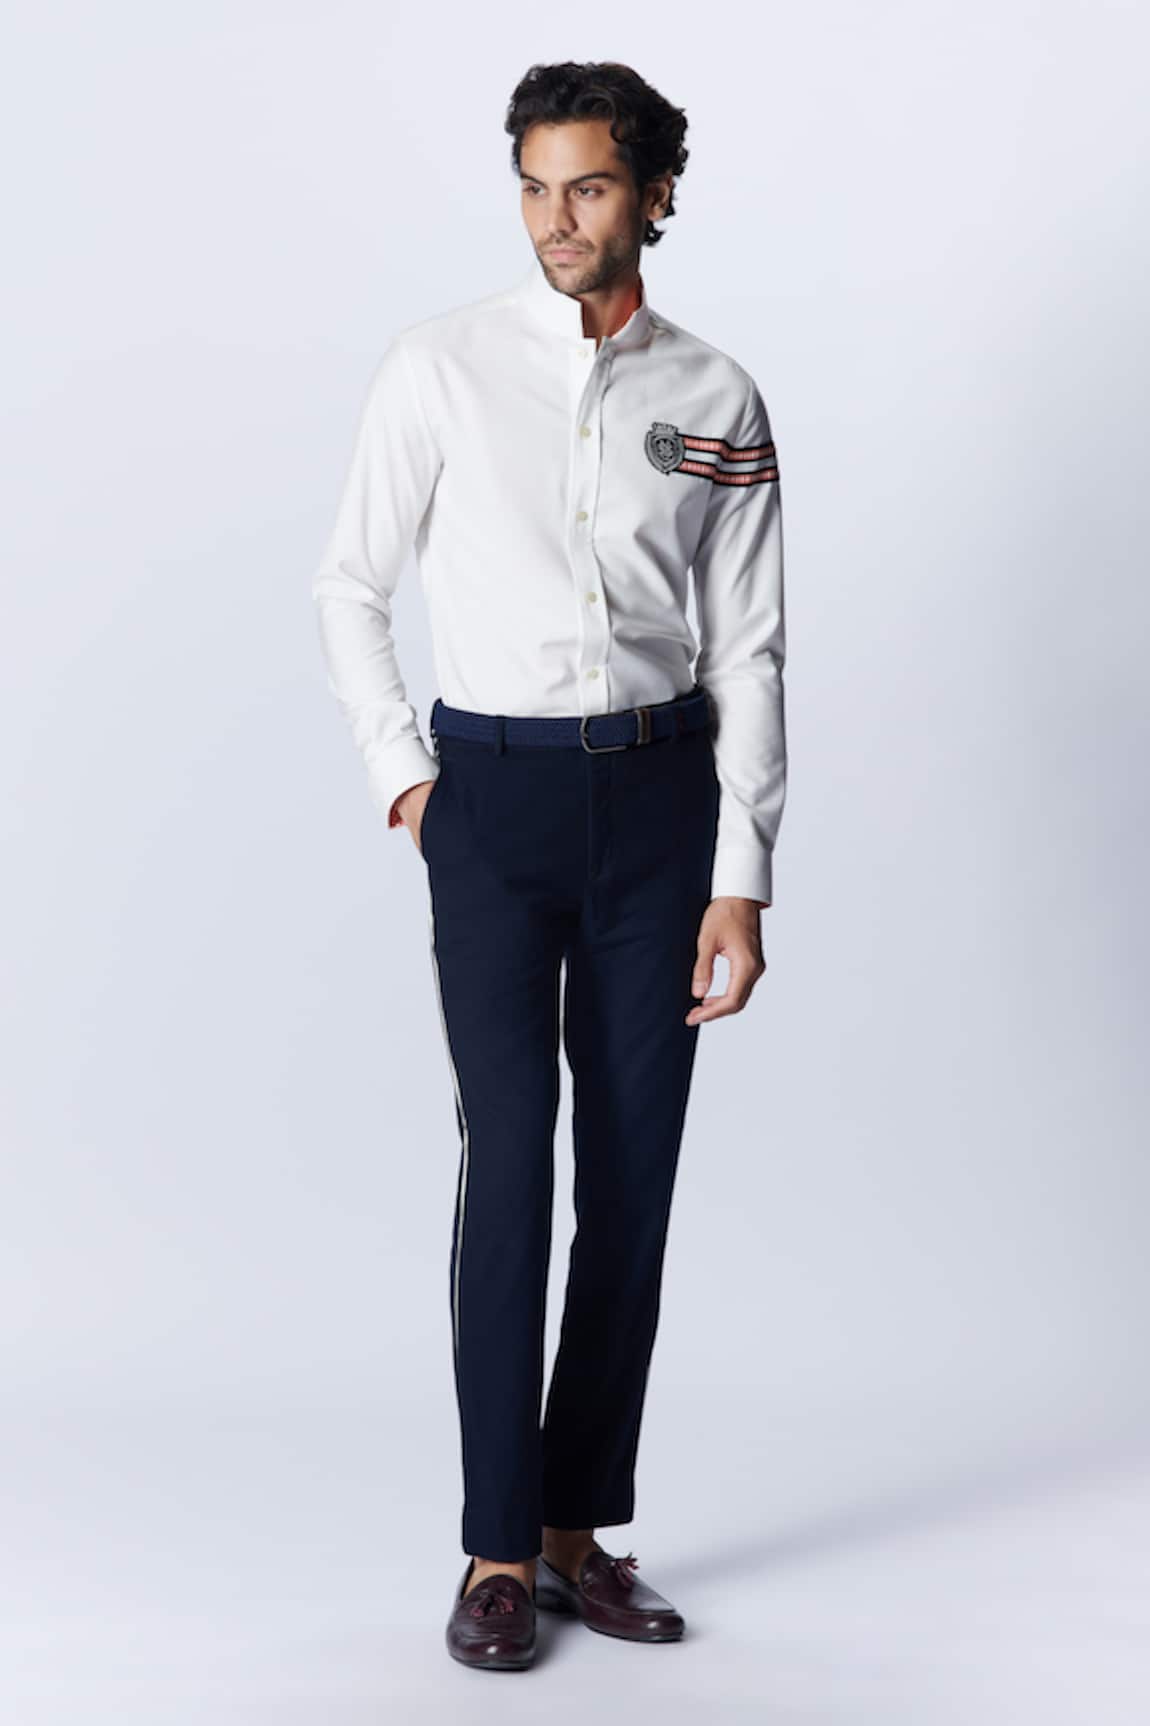 S&N by Shantnu Nikhil Crest Placement Embroidered Shirt